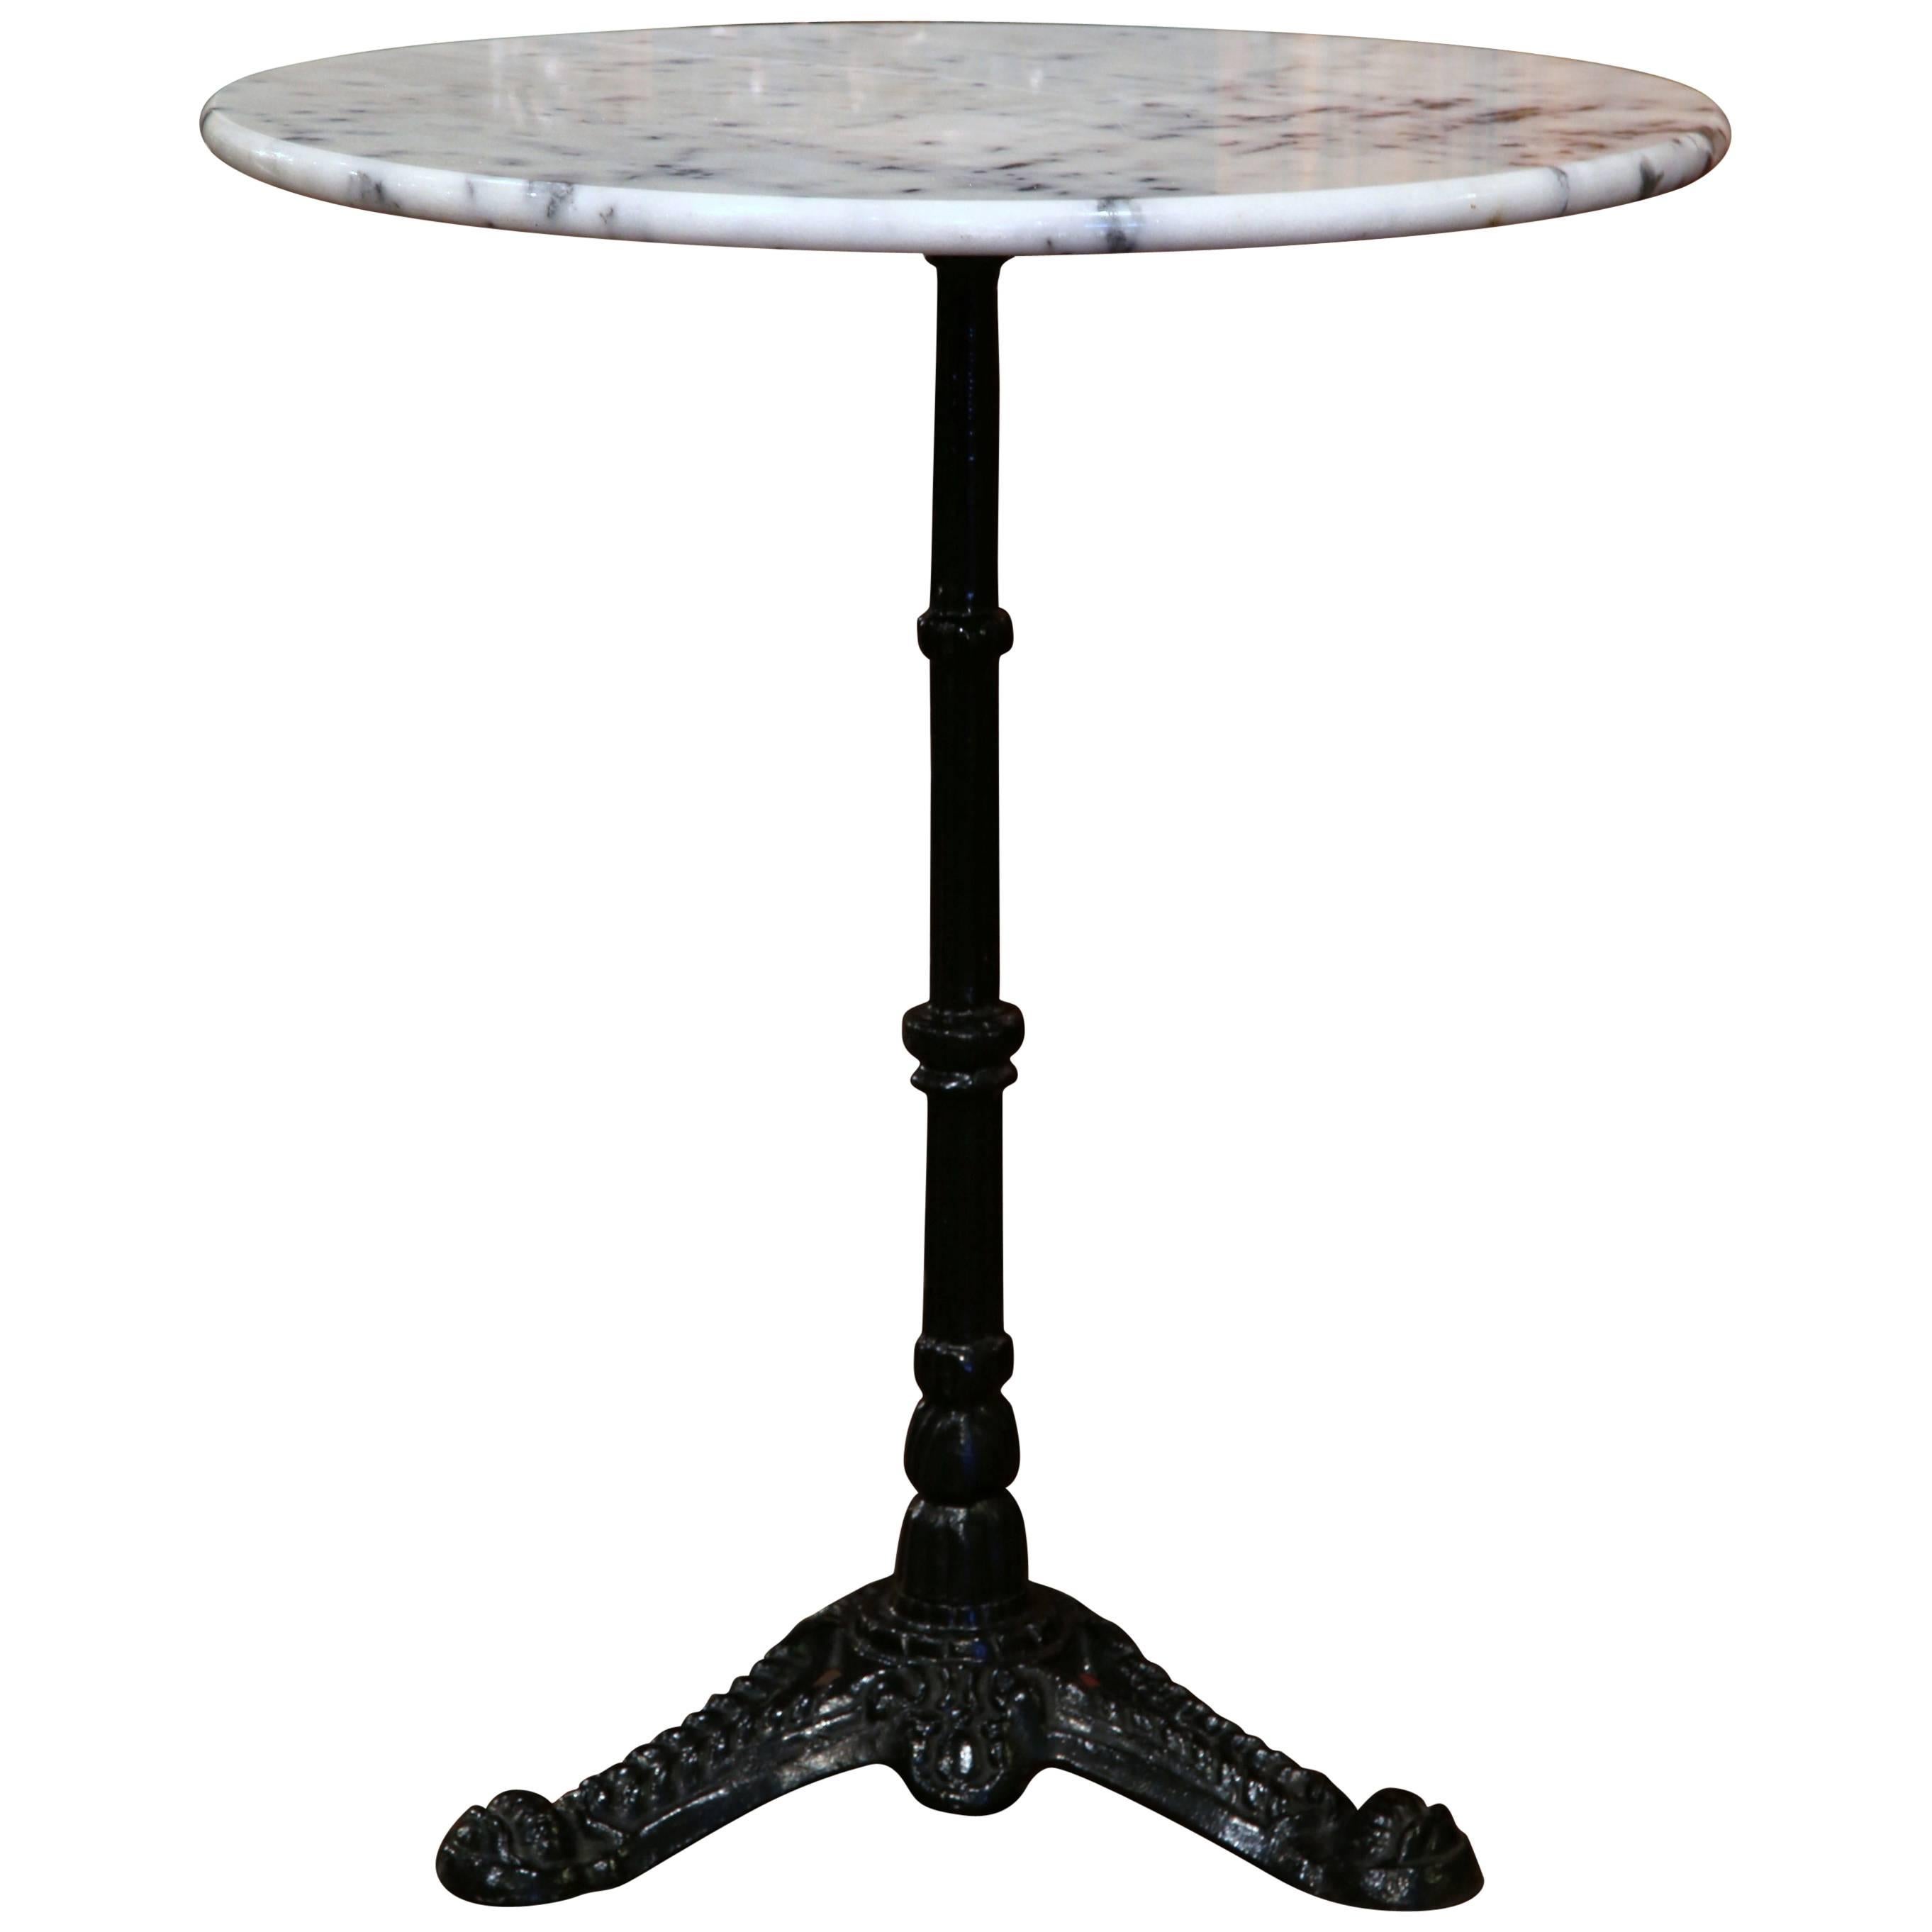 Early 20th Century Iron Pedestal Bistro Table from Paris with Round Marble Top